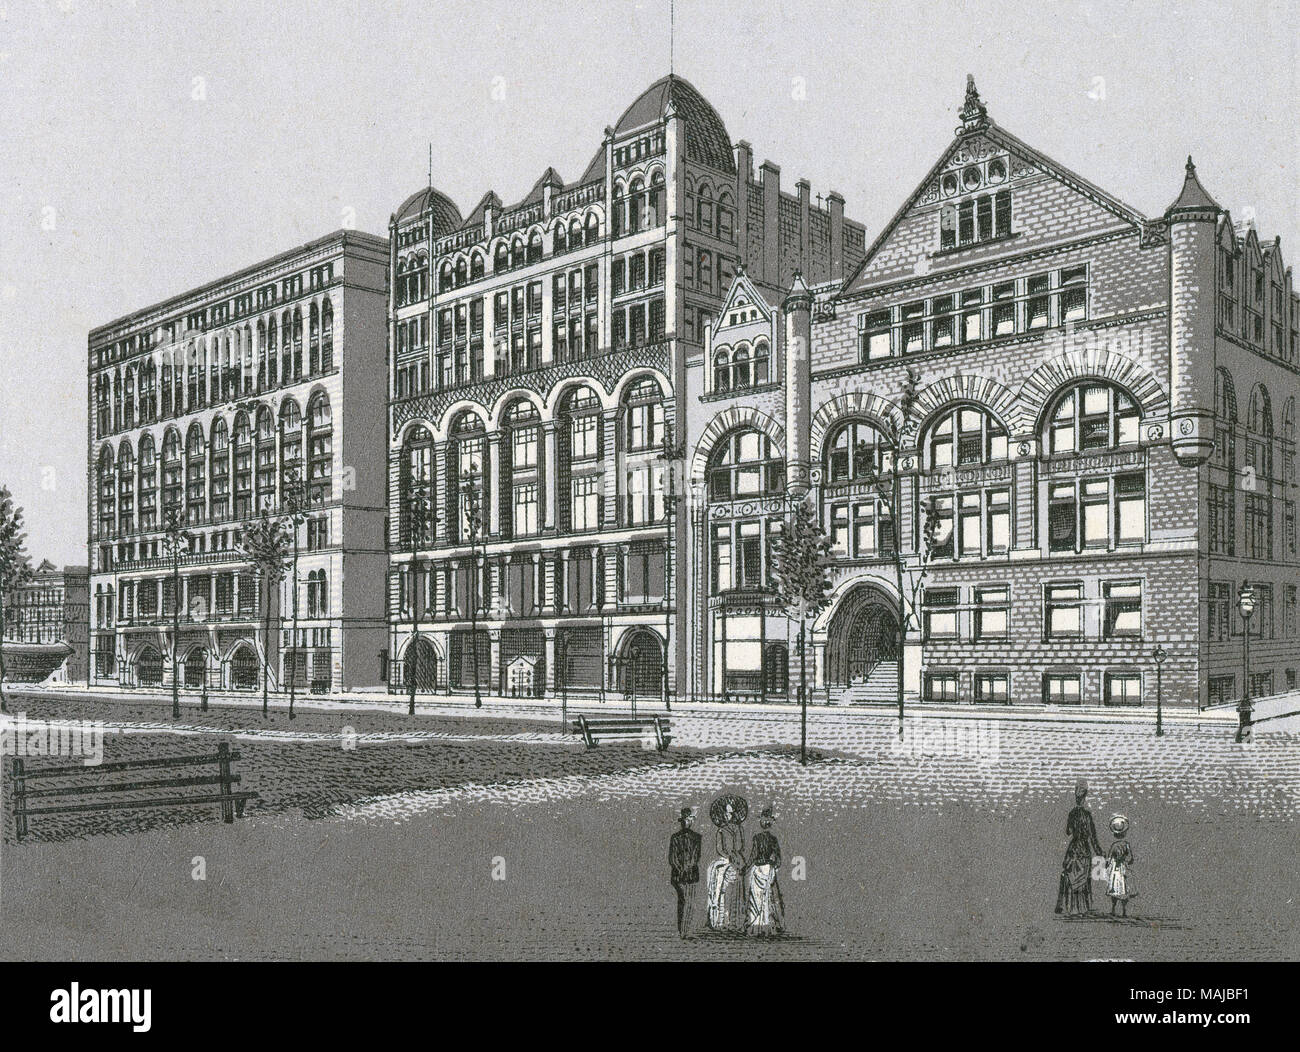 Antique c1890 monochromatic print from a souvenir album, showing the block of Michigan Avenue between Congress Street and East Van Buren Street, showing (l to r) Auditorium Building, Fine Arts Building, and The Chicago Club in Chicago, Illinois. Printed with the Glaser/Frey lithographic process, a multi-stone lithographic process developed in Germany. Stock Photo